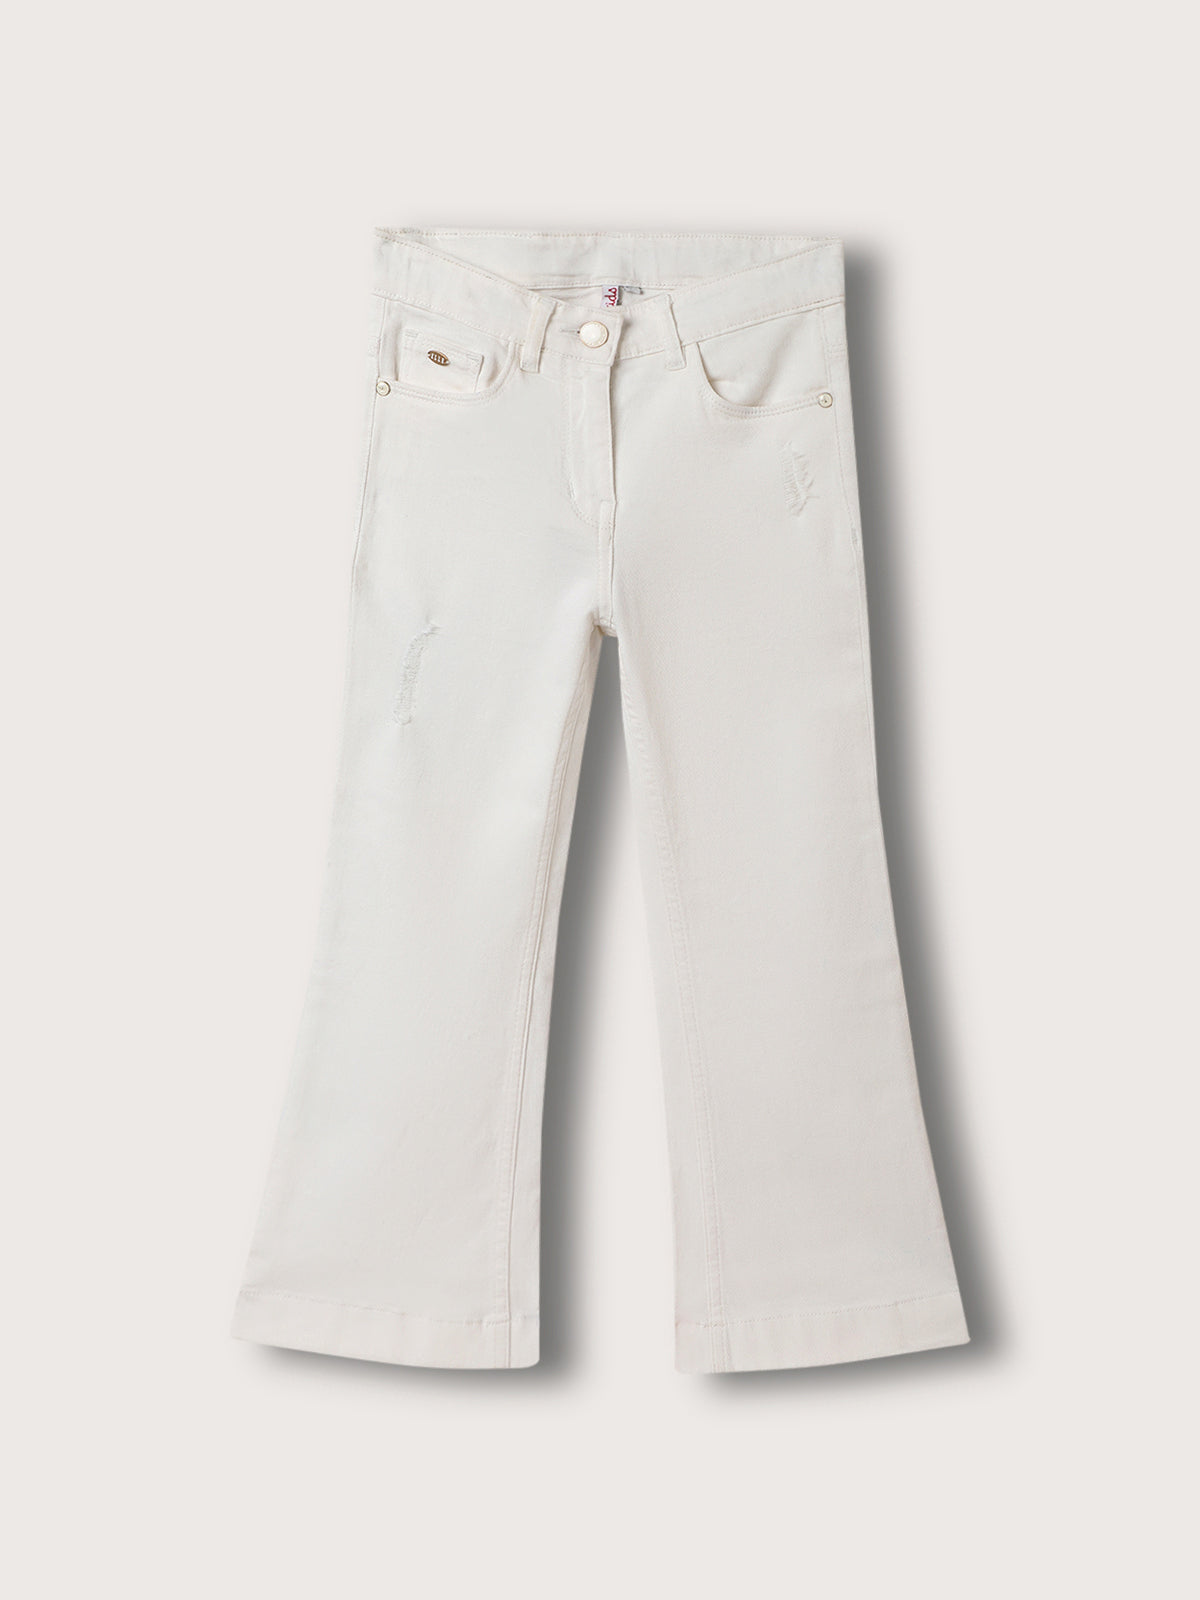 Elle Kids Girls White Solid Bootcut Jeans